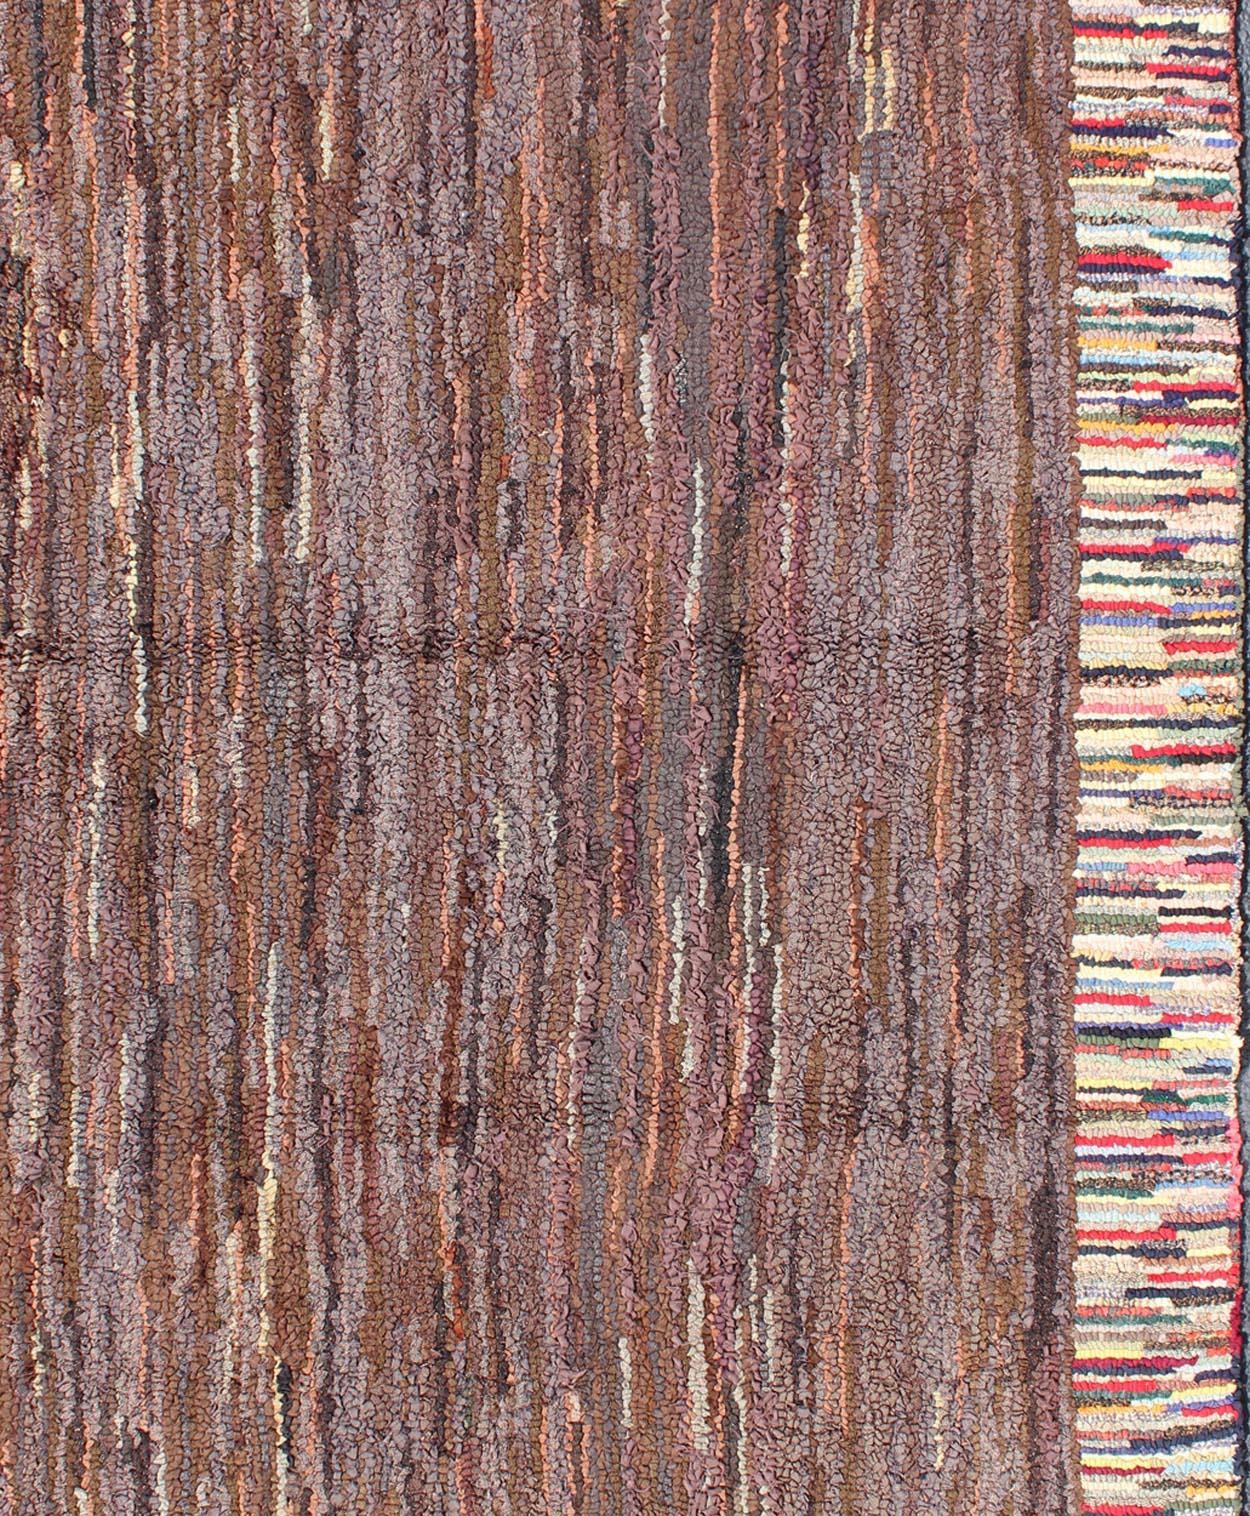 Antique hooked rug with variegated design, rug J10-1005, country of origin / type: United States / Hooked, circa 1920.

This antique American Hooked rug features a variegated stripe design. The rug was woven in a hooked fashion, and the variety of